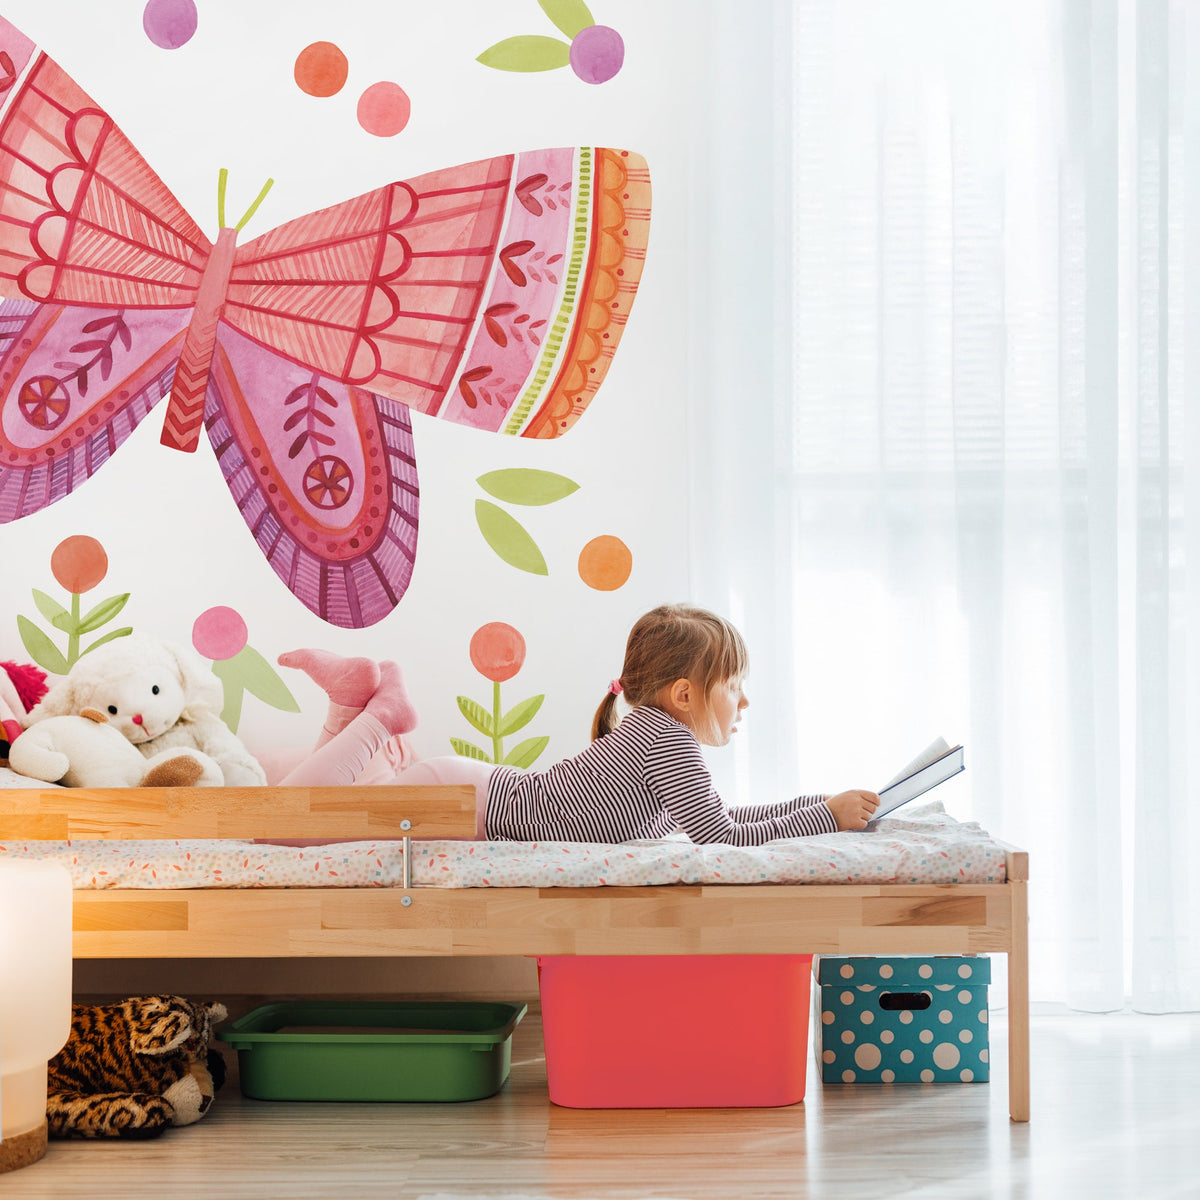 Citrus Blossom Butterfly Wings Wall Decal Set